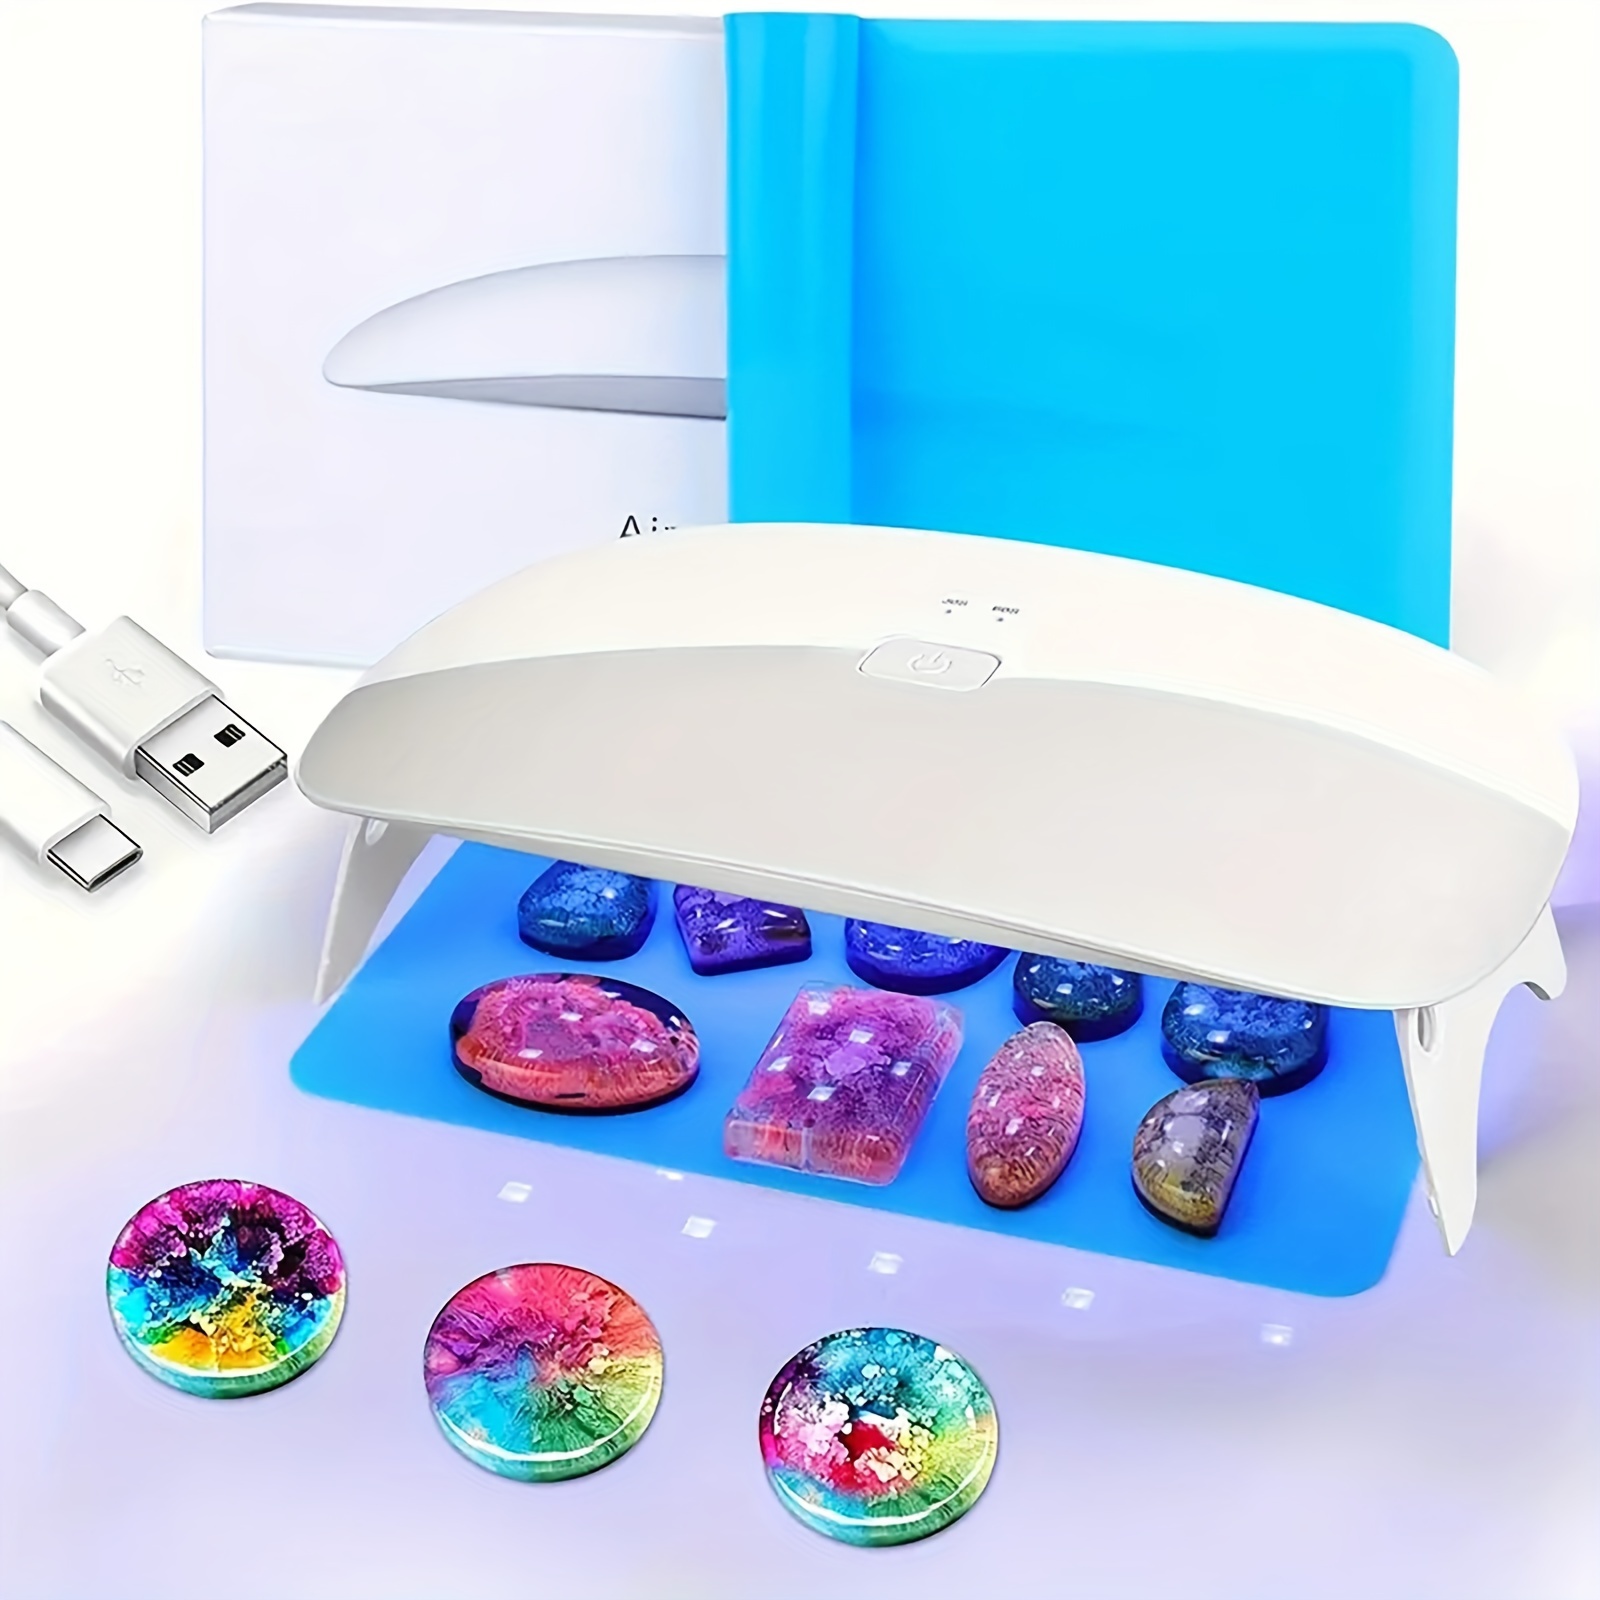 25 G Led Uv Resin & 6 W Uv Led Lamp Dryer Kit Resin Mold Hard For Jewelry  Making - Jewelry Tools & Equipments - AliExpress